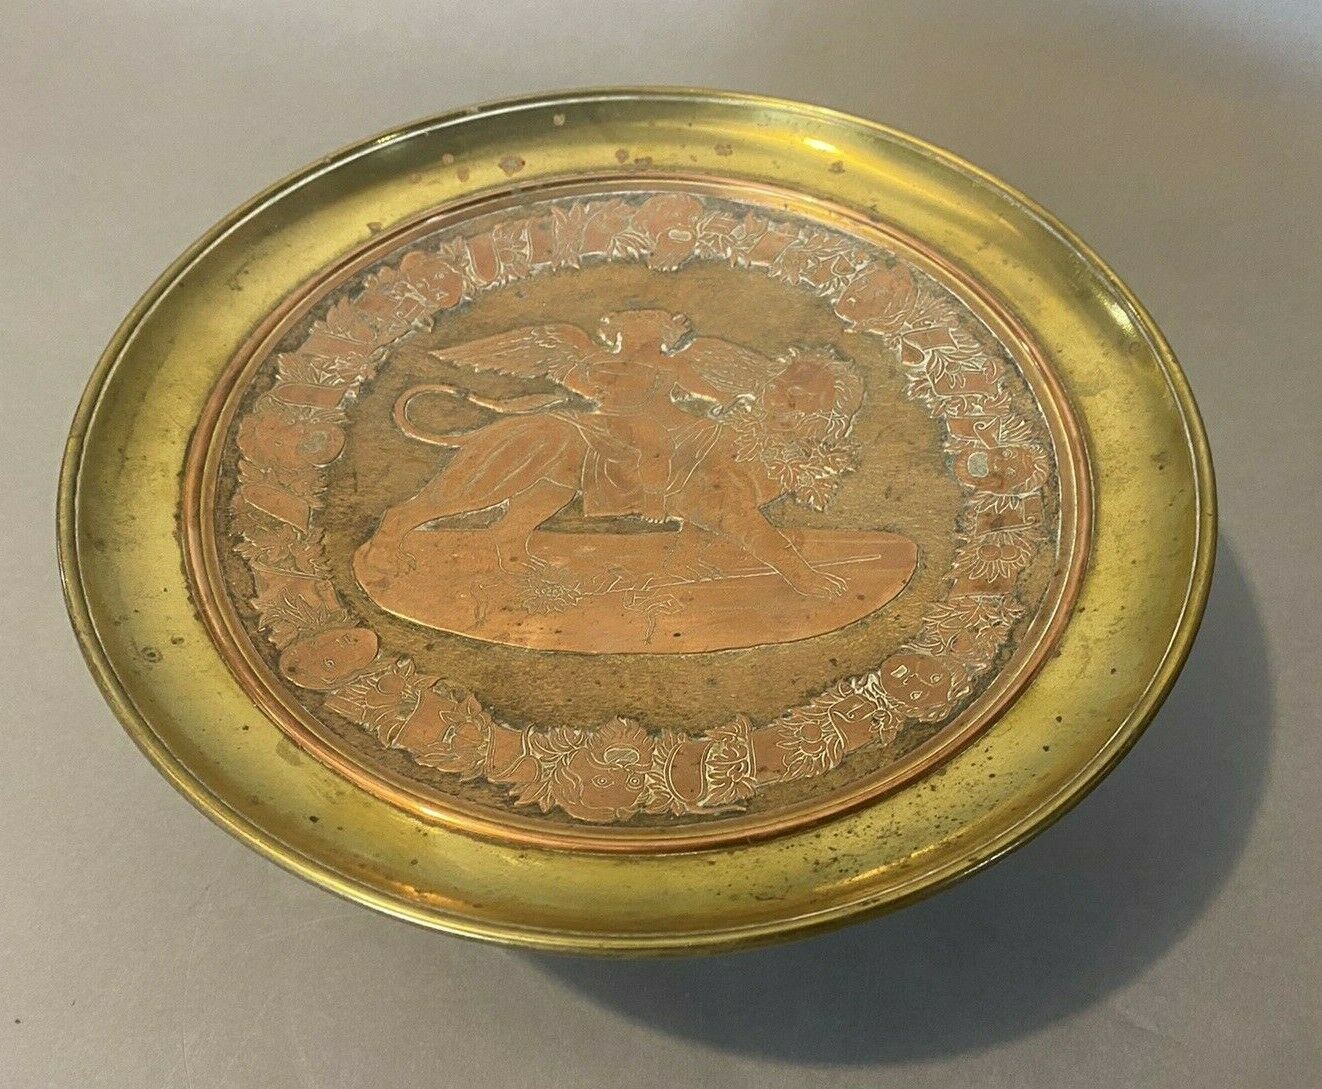 ANTIQUE VICTORIAN MIXED METAL TAZZA CALLING CARD DISH WINGED CUPID RIDING A LION